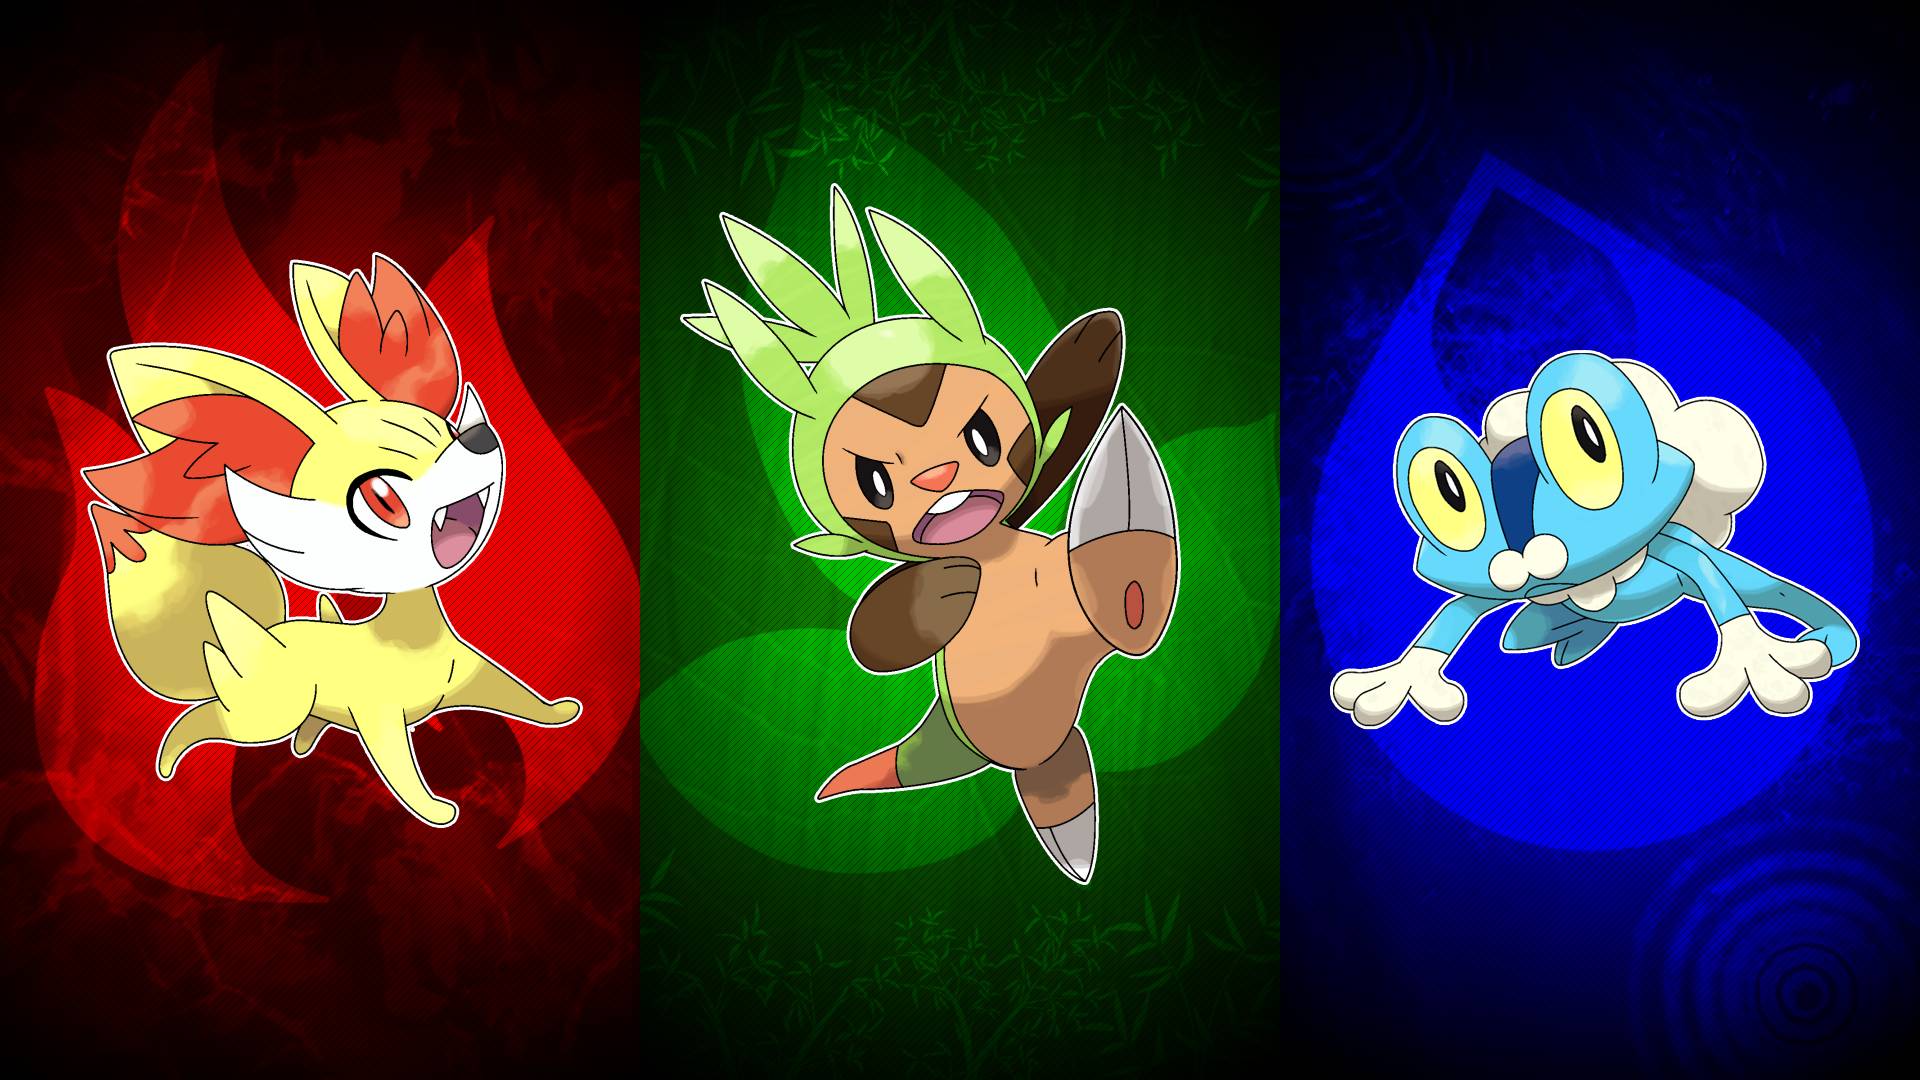 http://gamingbolt.com/wp-content/uploads/2013/01/pokemon-x-and-y-wallpapers-in-hd.jpg